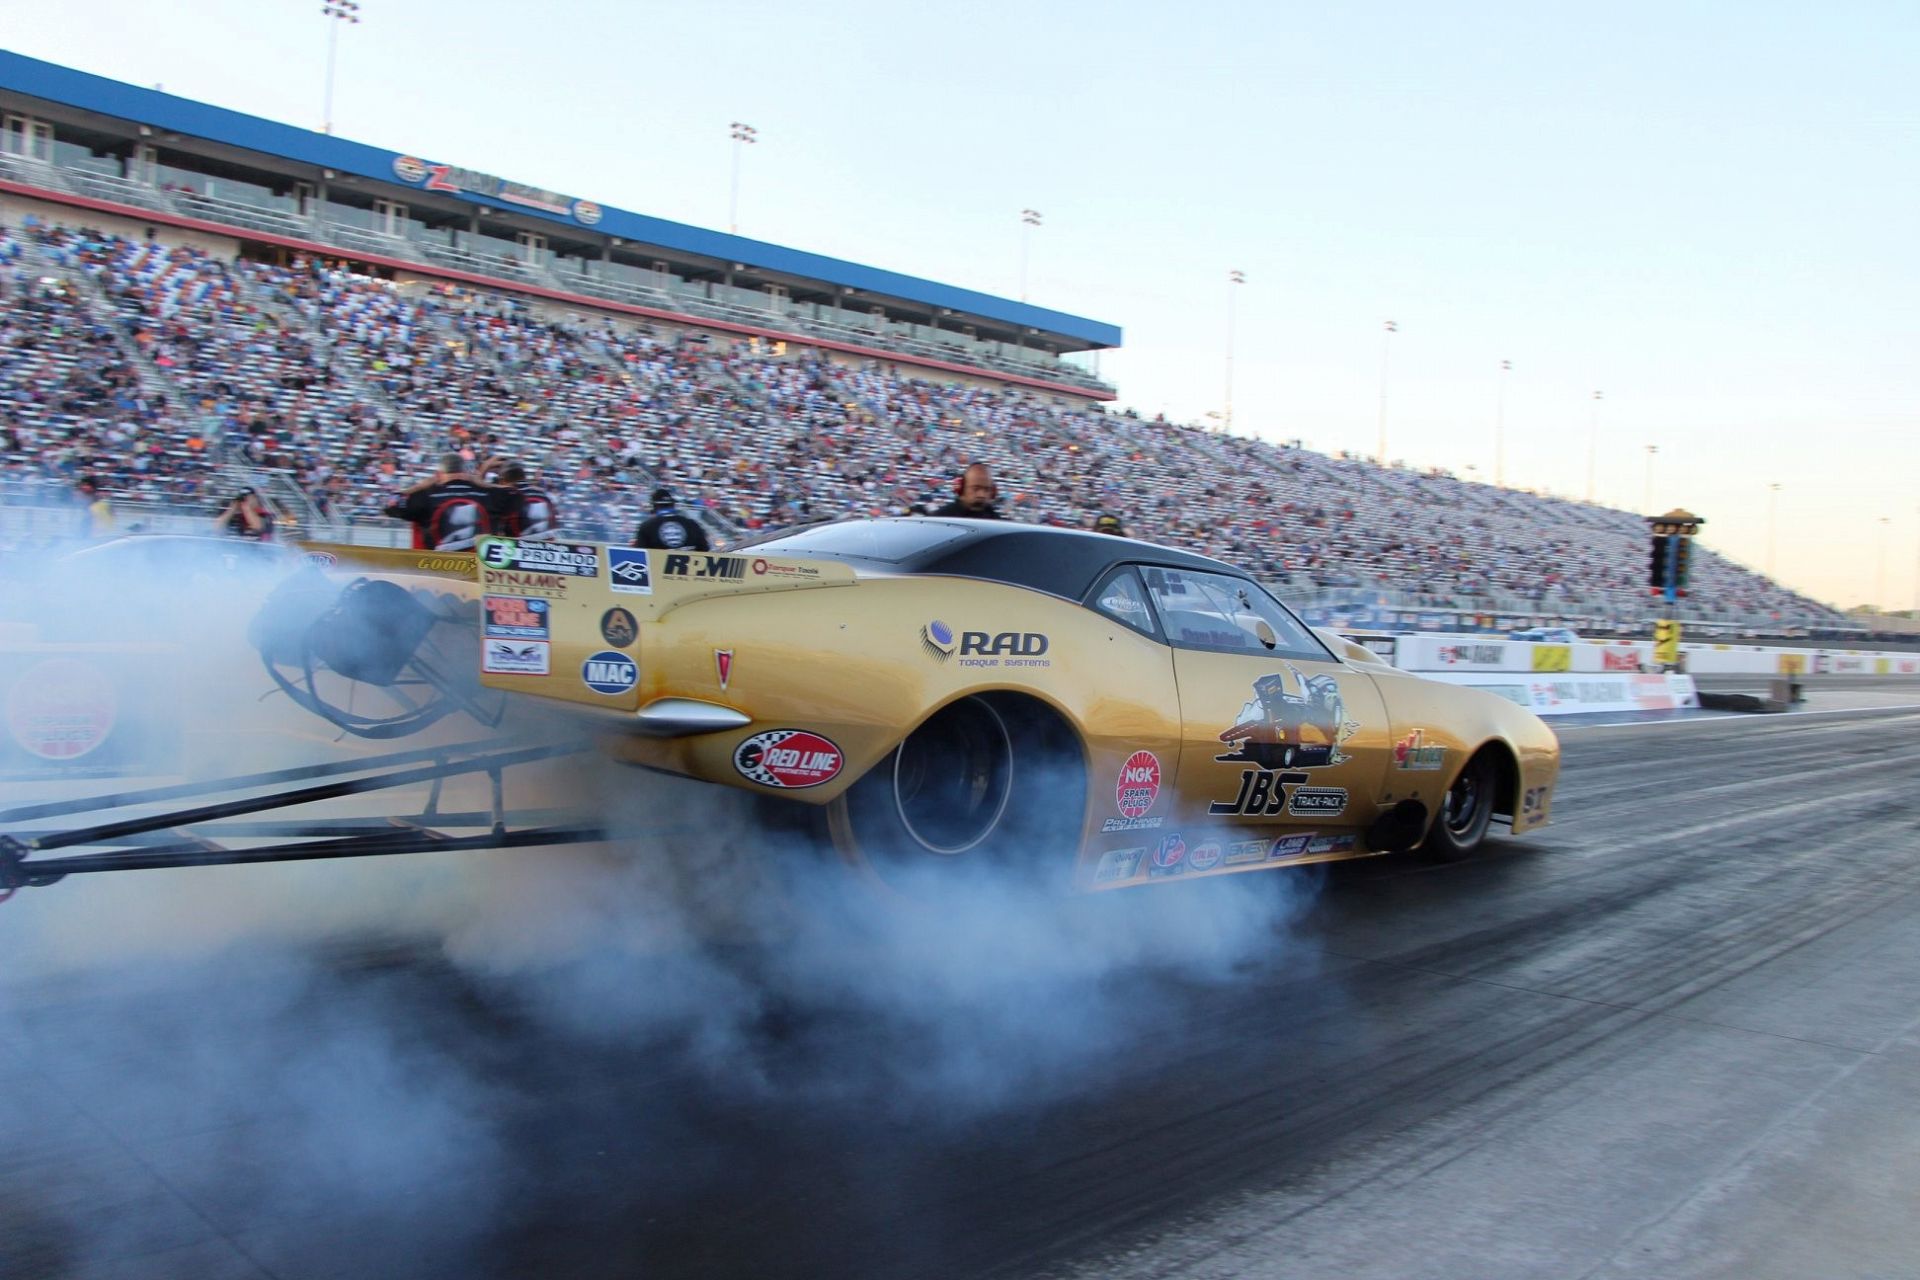 E3 Spark Plugs Highlights the Players in Pro Mod: Shane Molinari